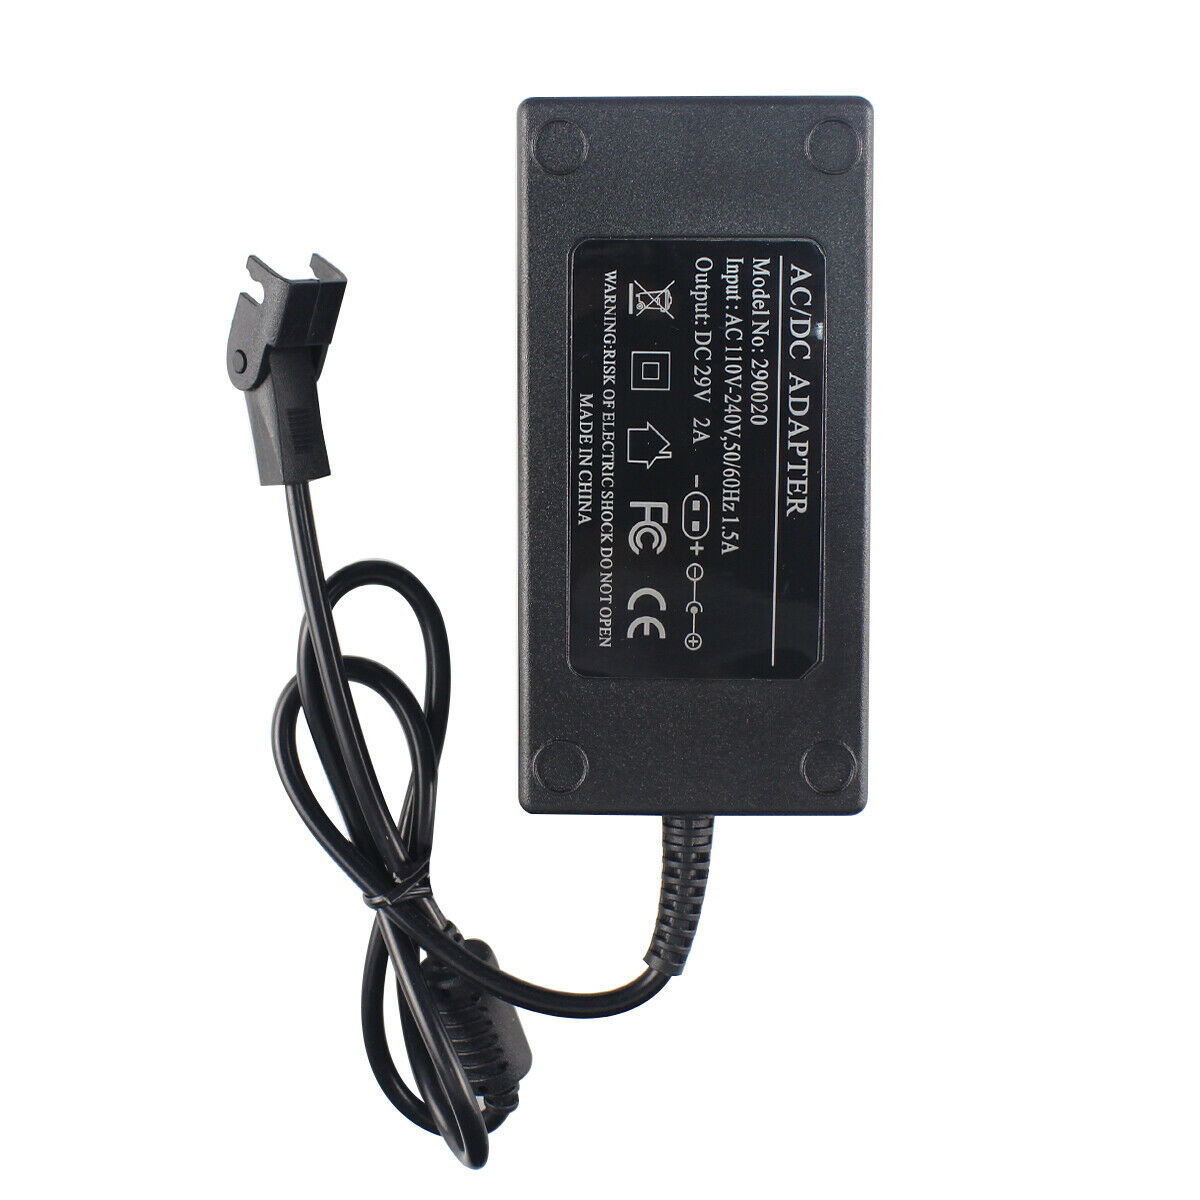 Power Supply Recliner Sofa / Chair Adapter Switching Transformer 29V 2A AC/DC Country/Region of Manufacture: China M - Click Image to Close